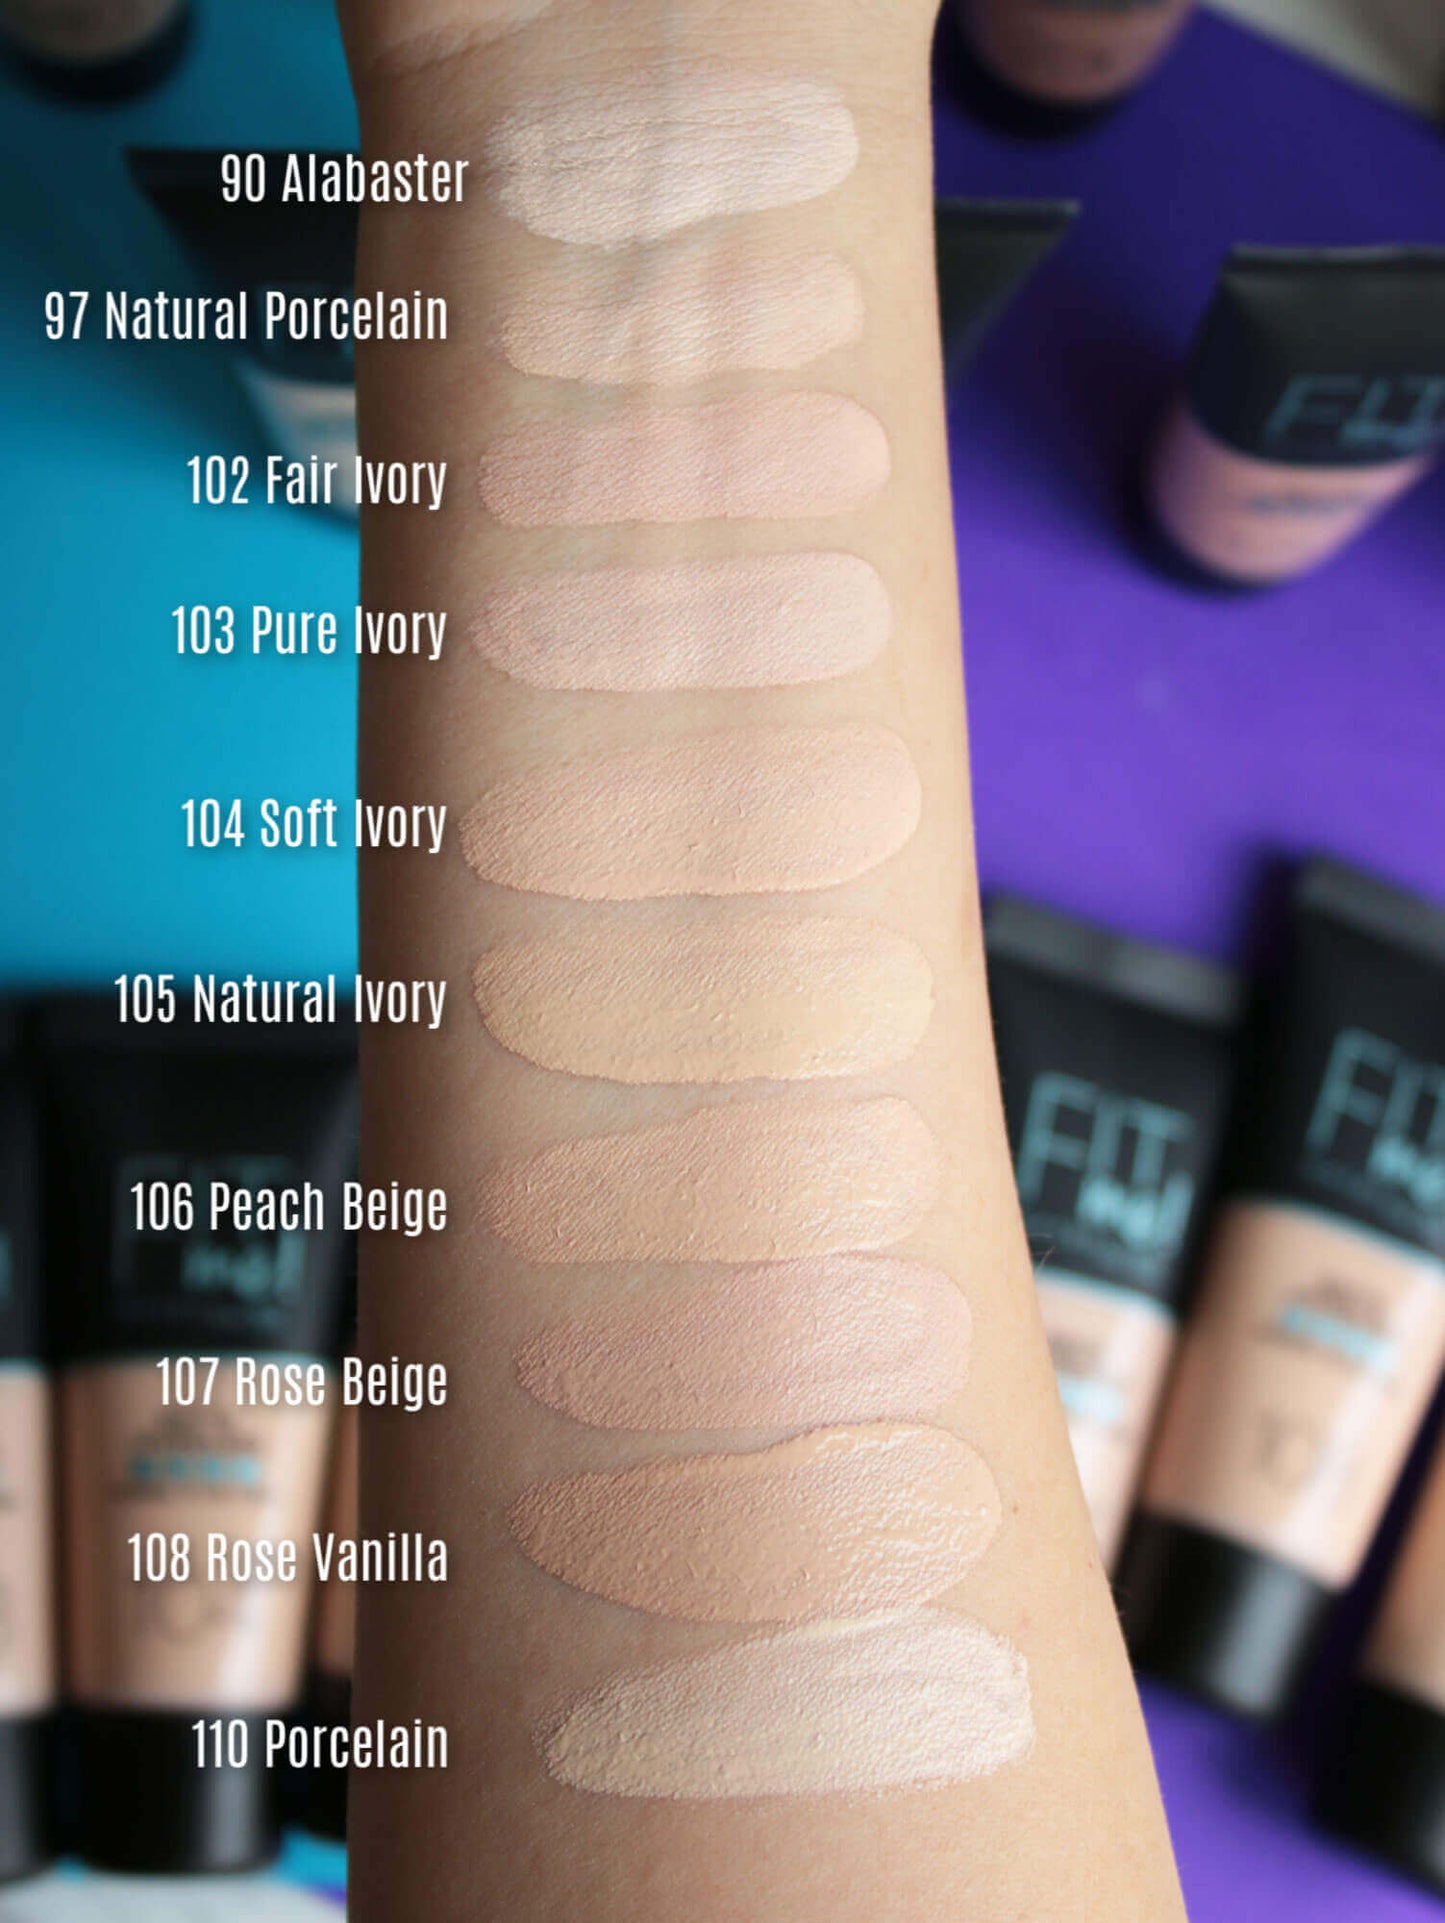 Maybelline Fit Me  Foundation Normal To Oily 30 ml - 120 Classic Ivory